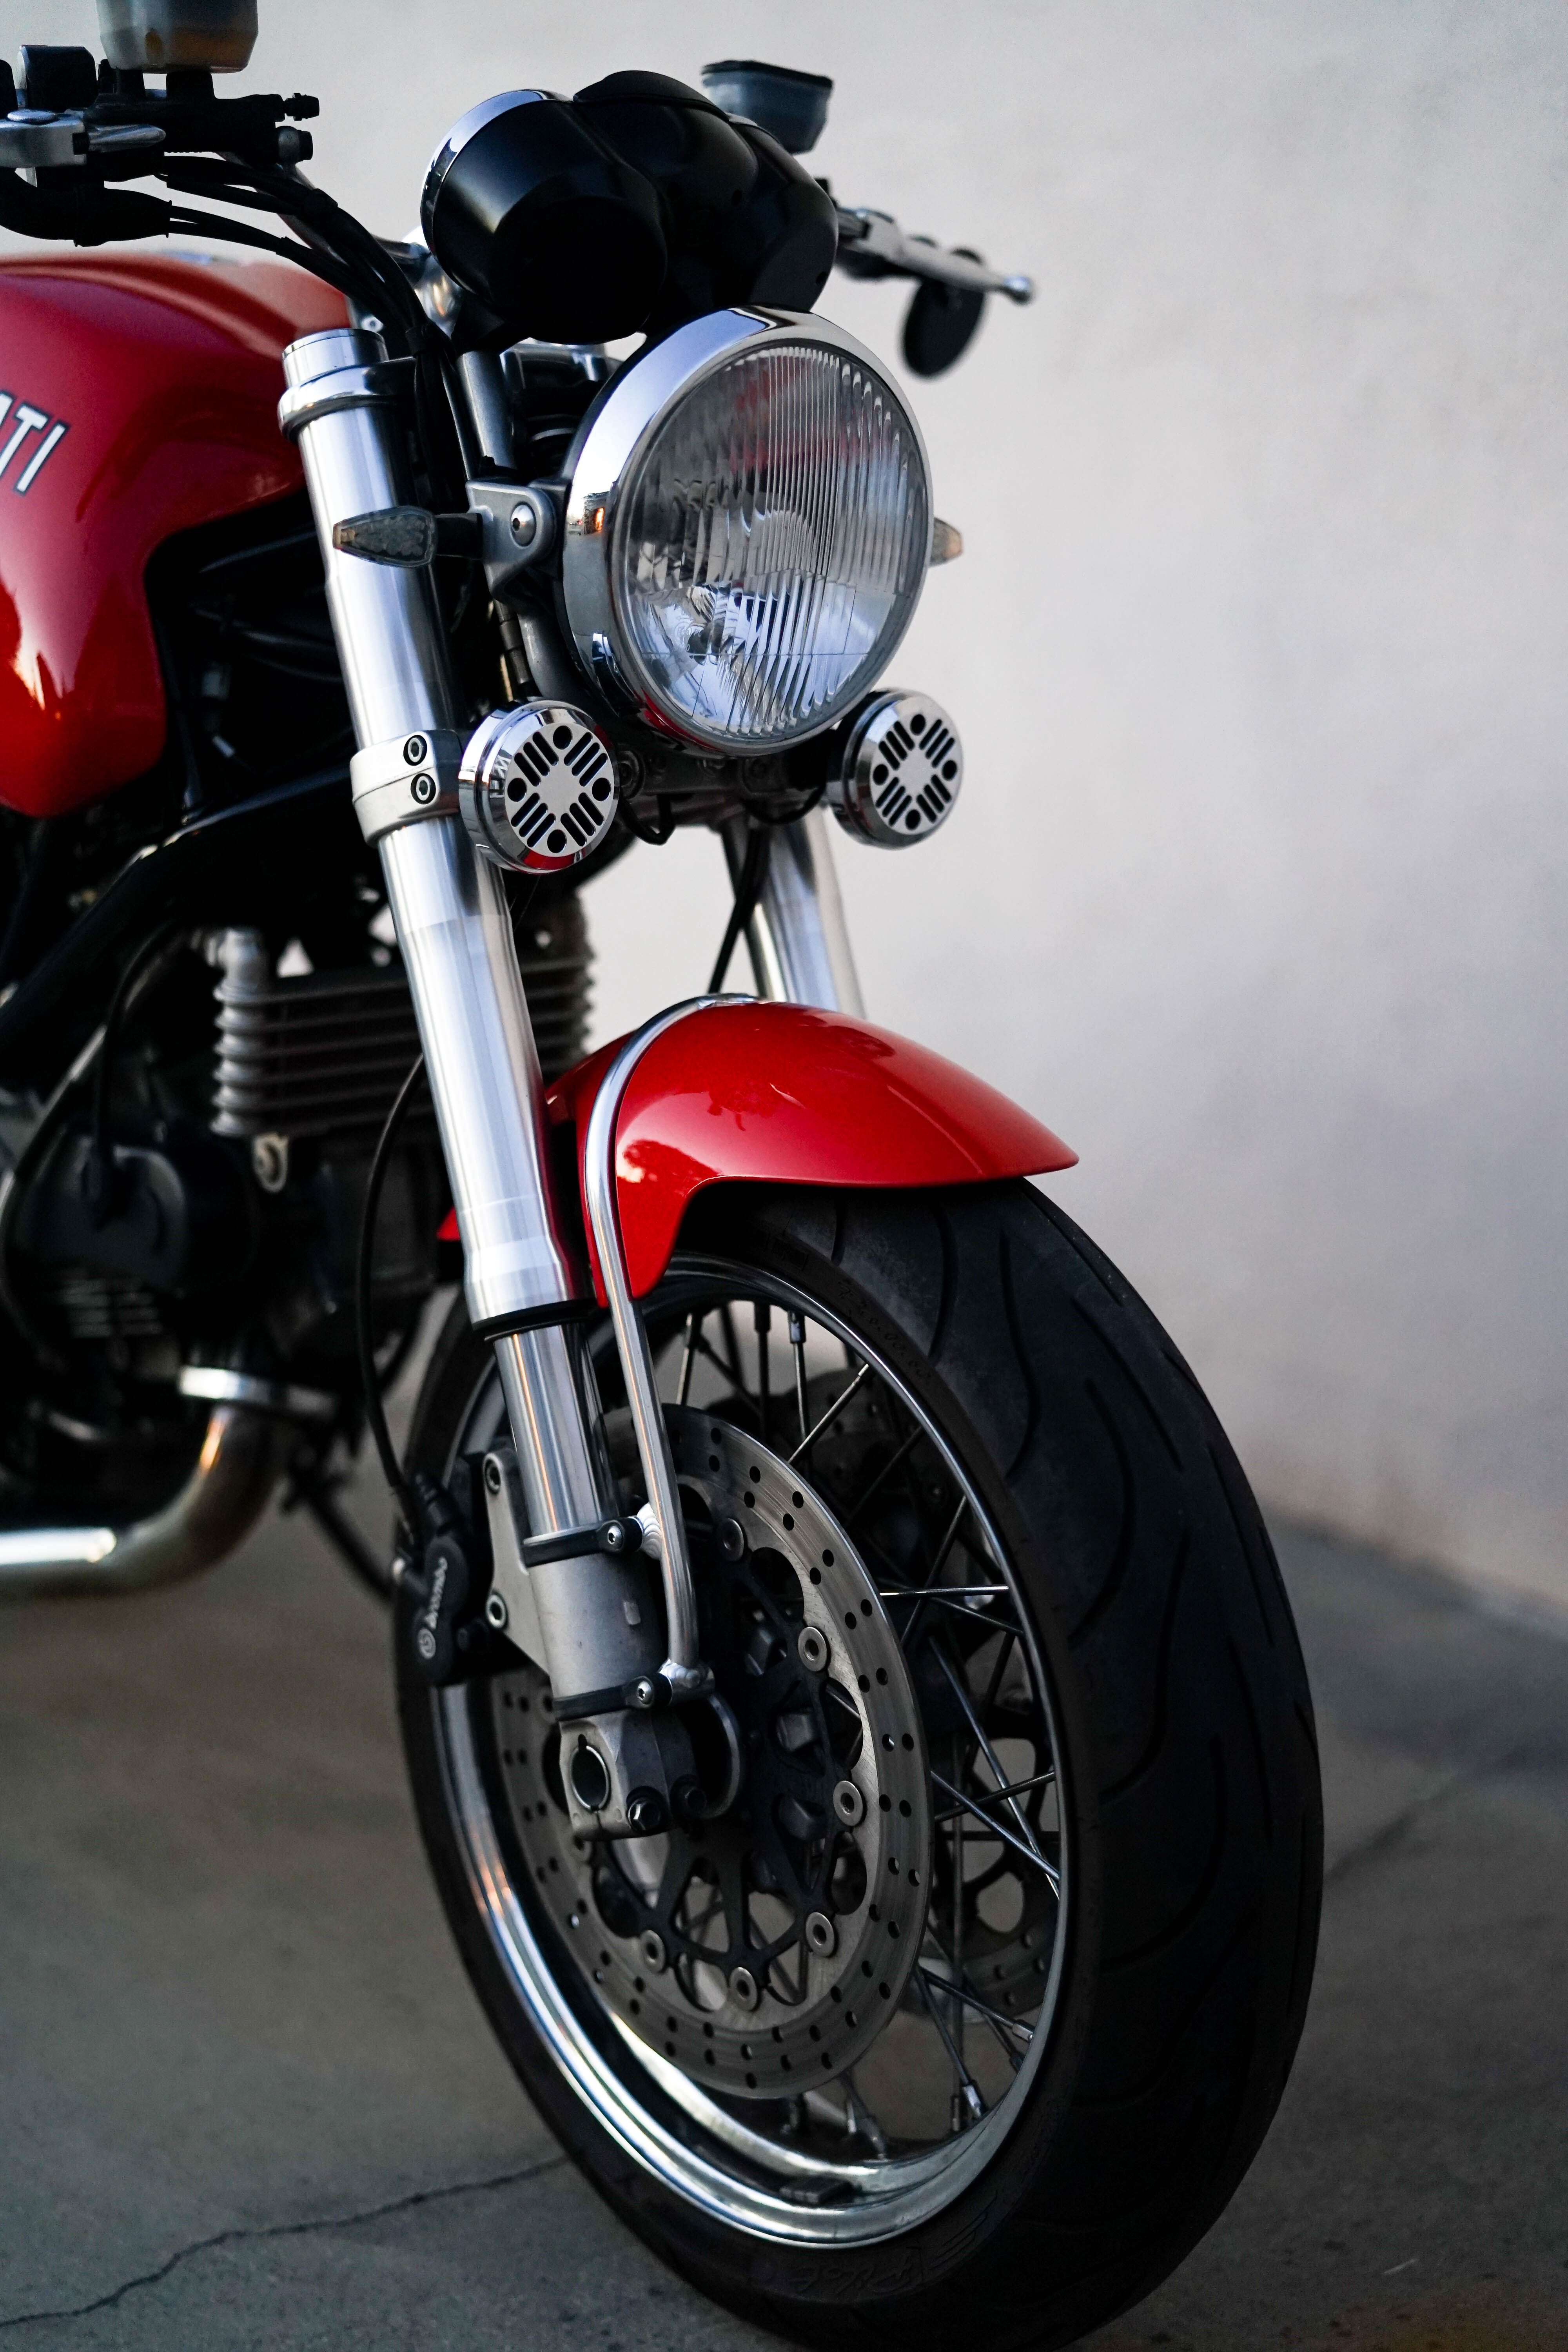 Ducati Gt1000 front end